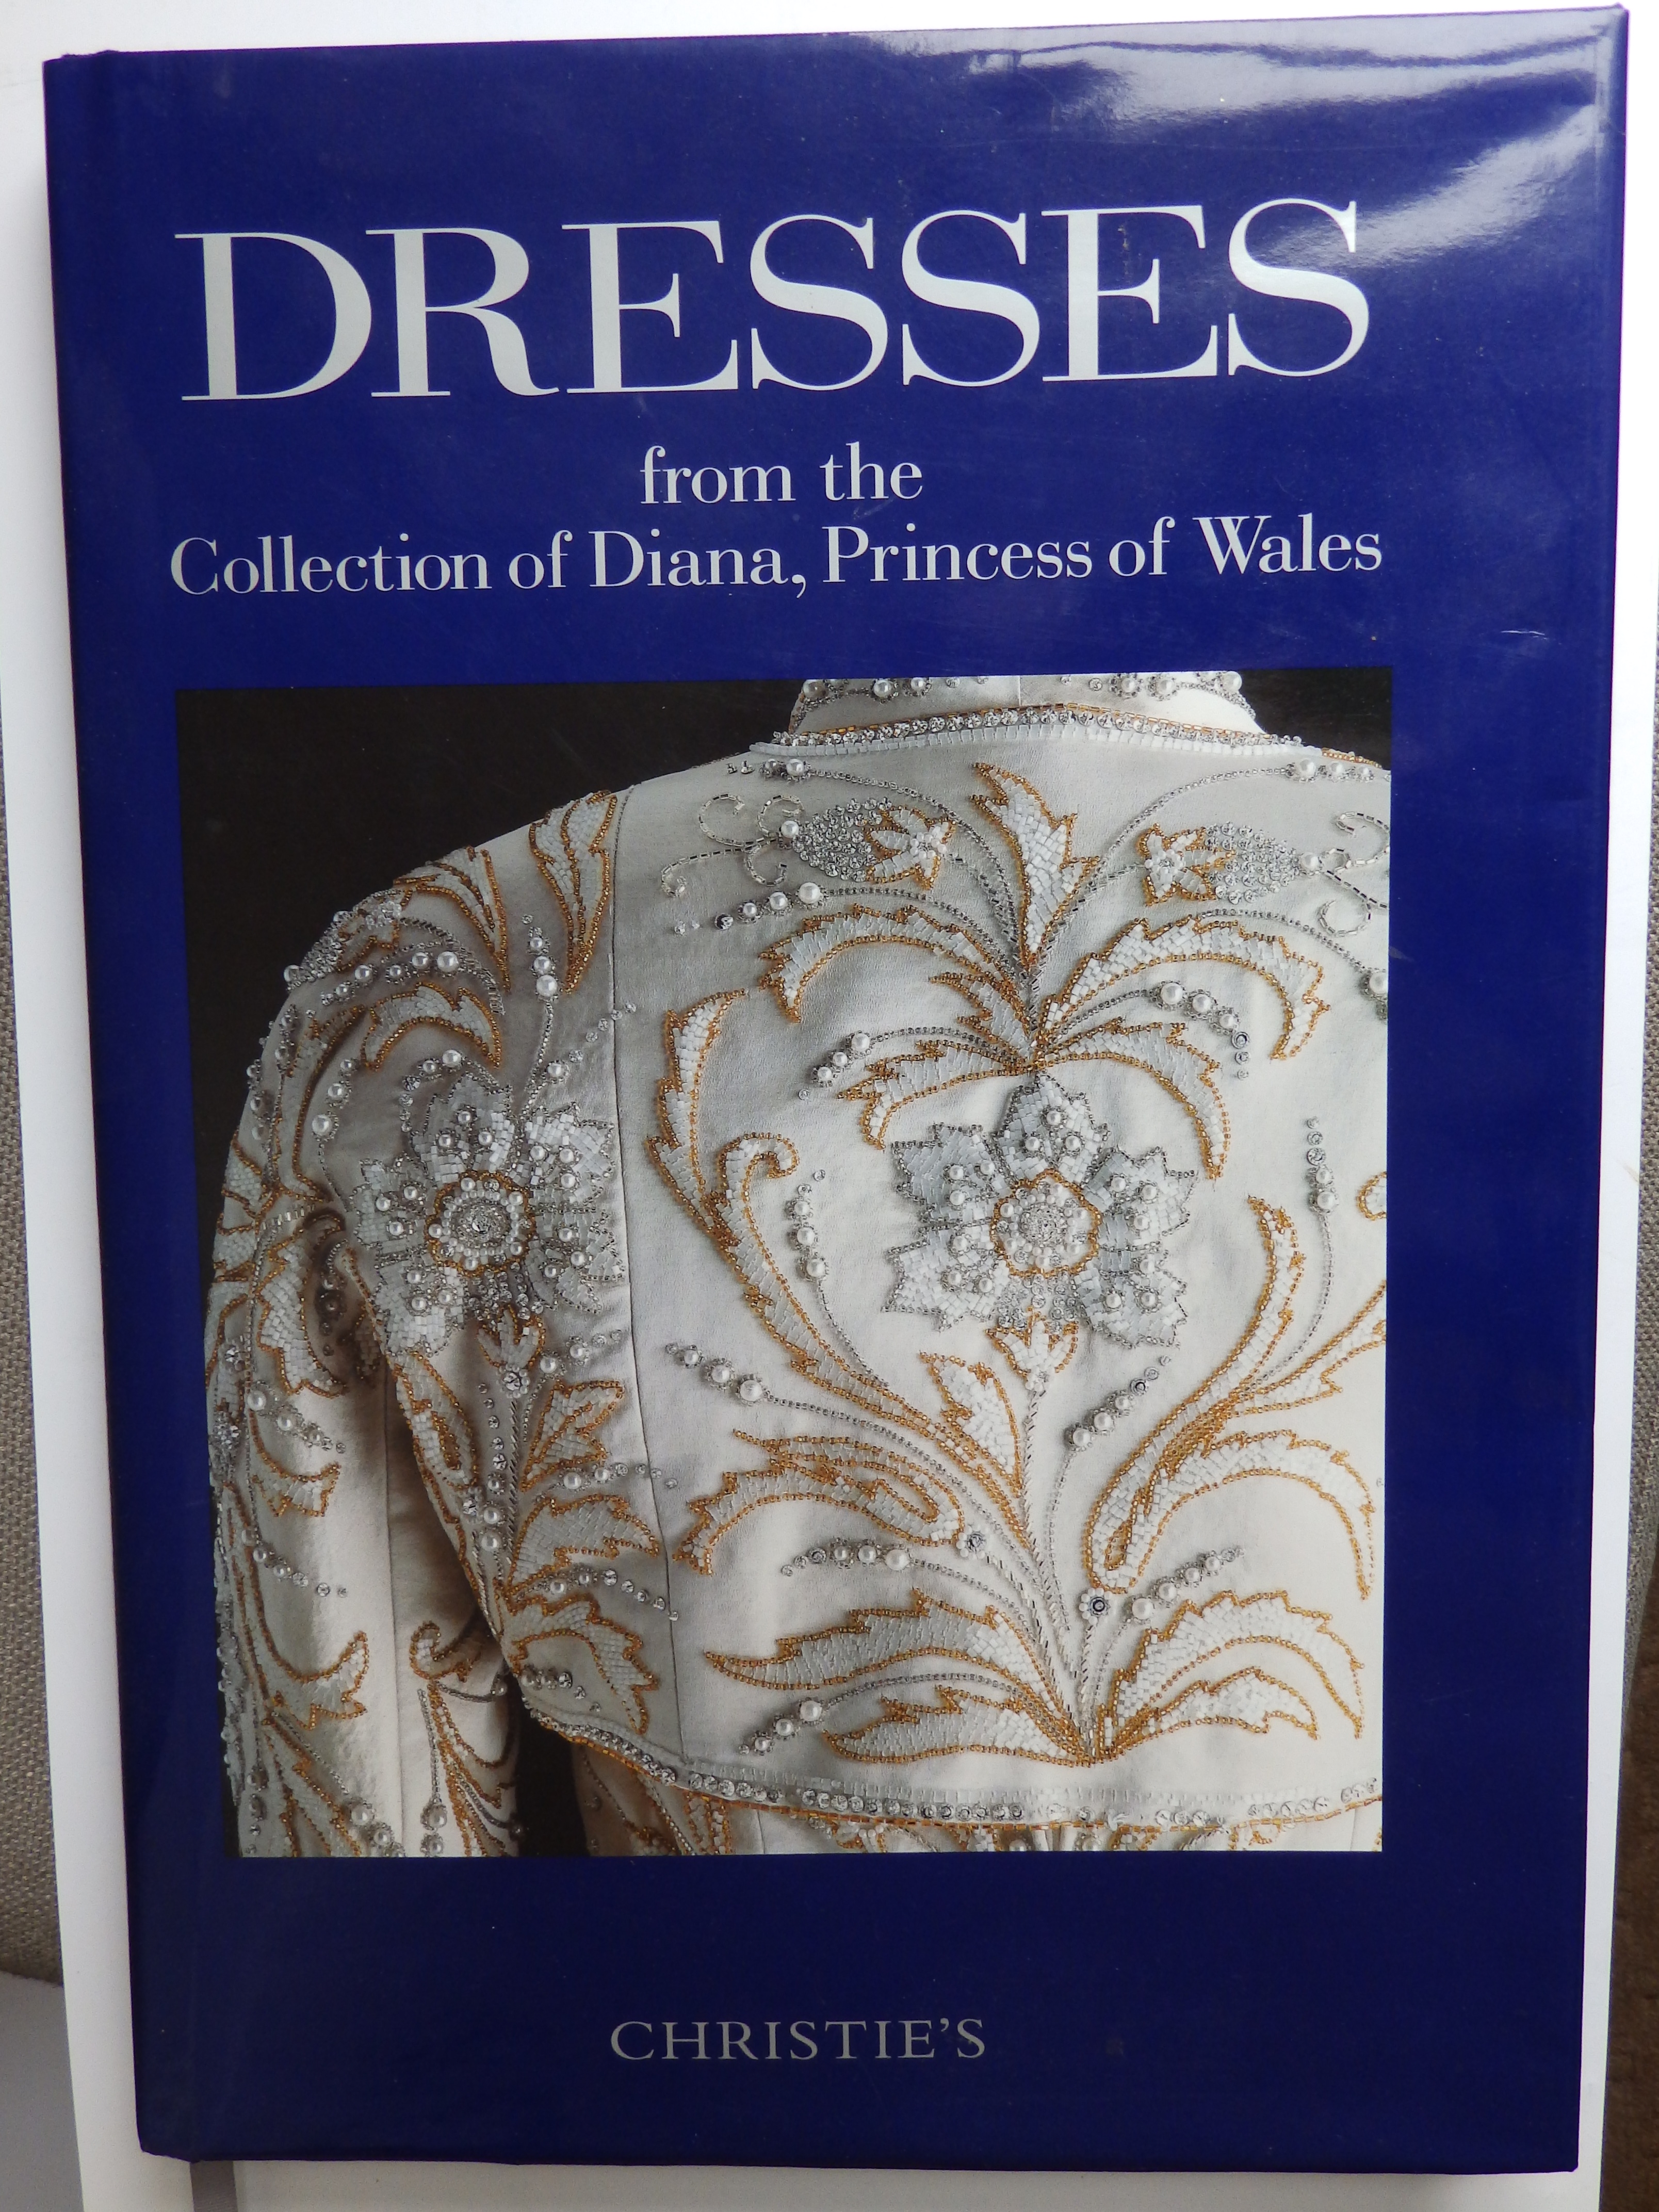 'Dresses From the Collection of Diana, Princess of Wales' – a catalogue of the charity auction